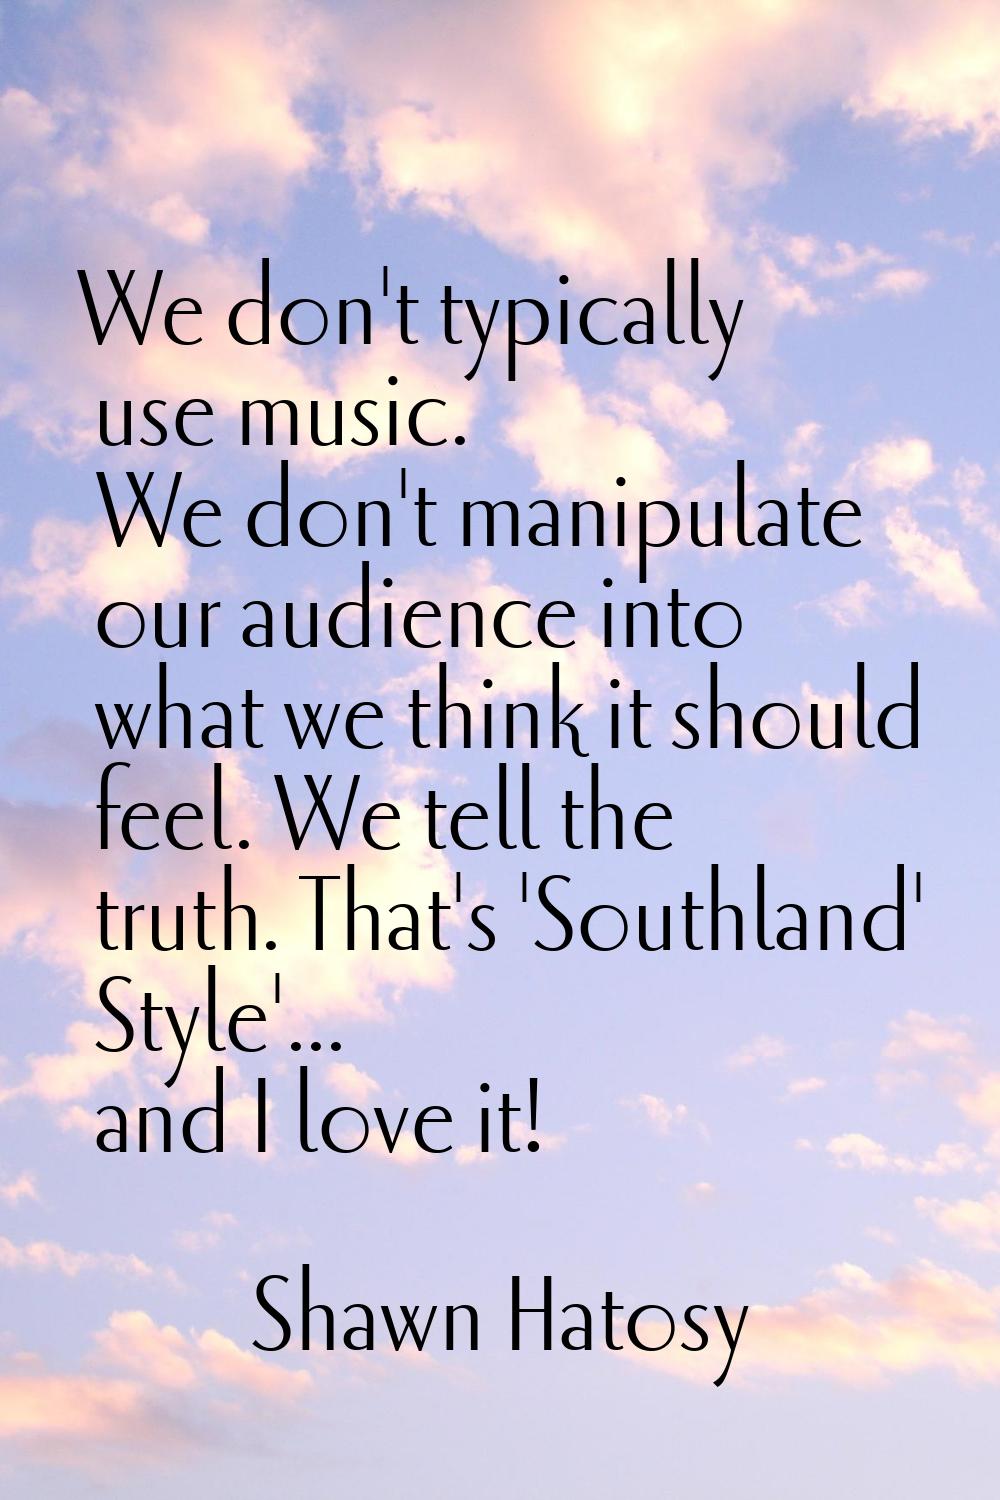 We don't typically use music. We don't manipulate our audience into what we think it should feel. W